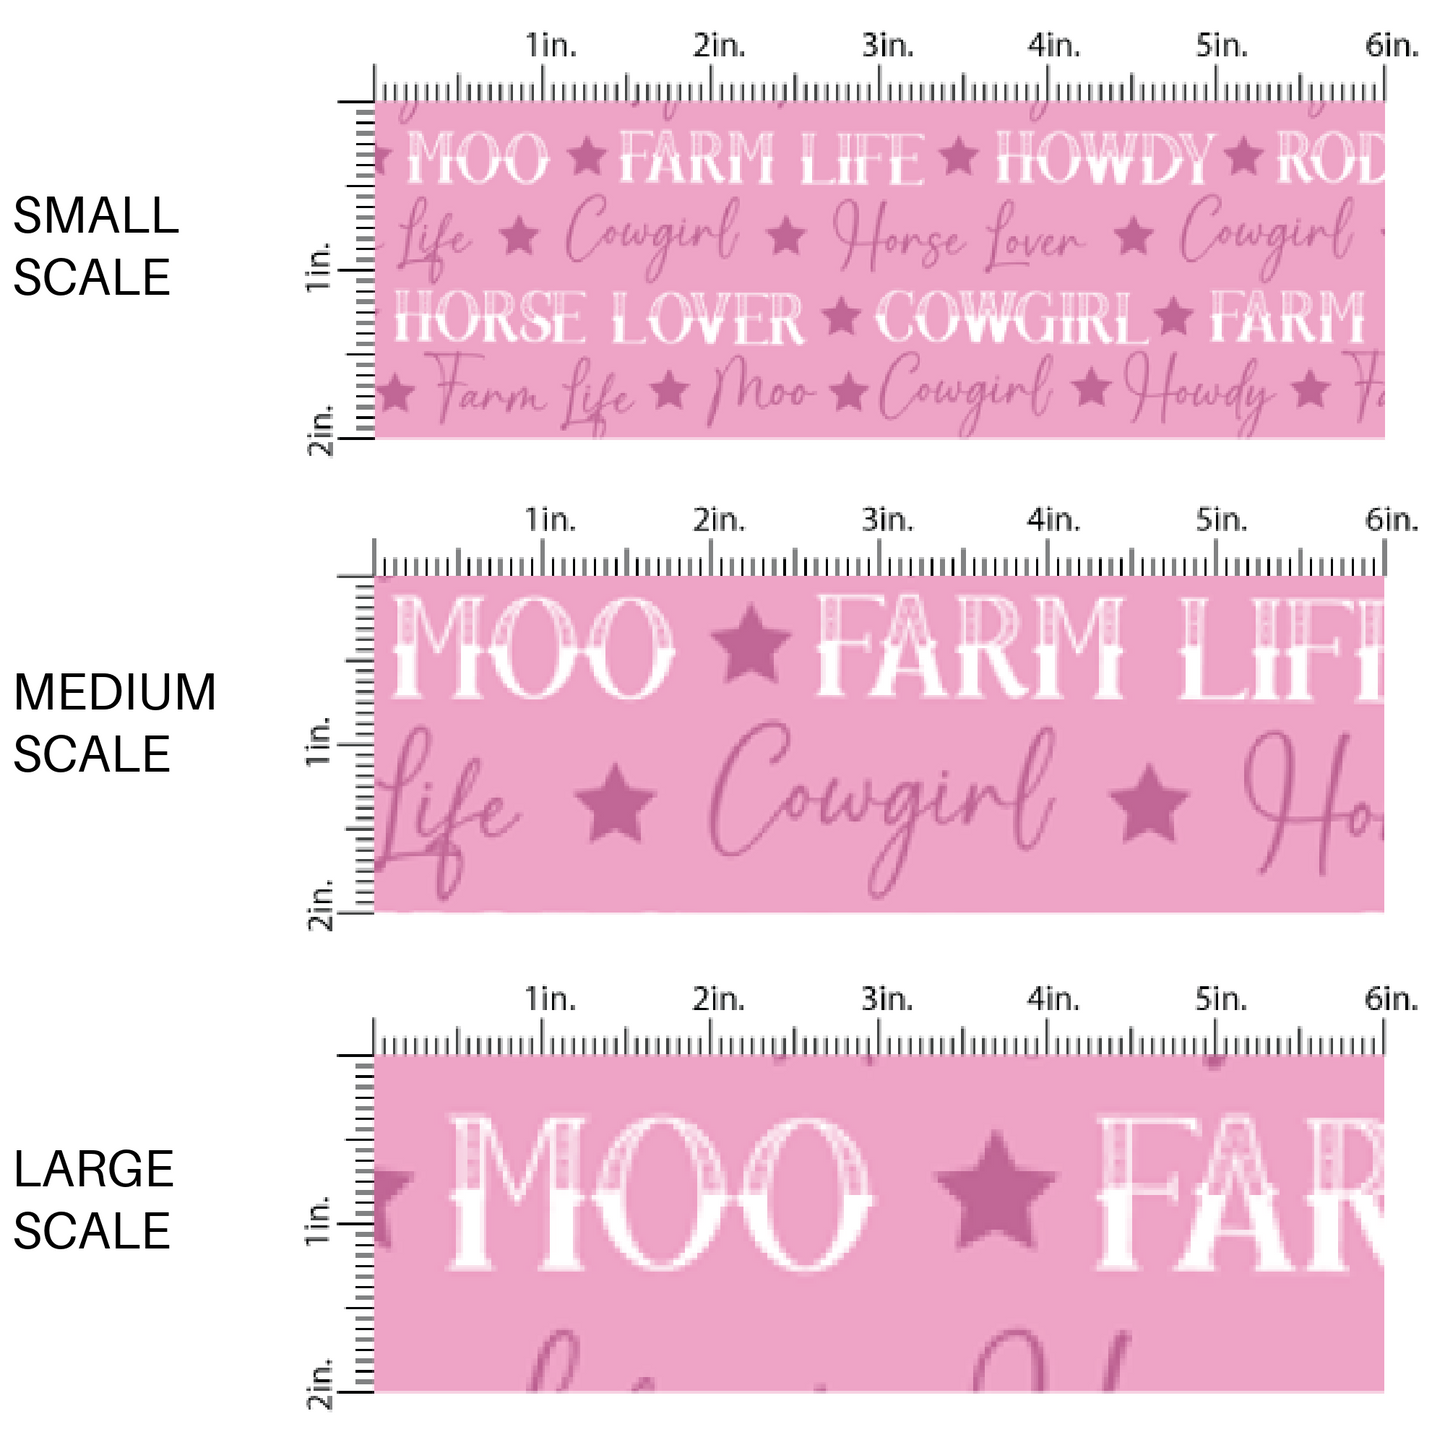 Western Rodeo Phrases on Pink Fabric by the Yard scaled image guide.